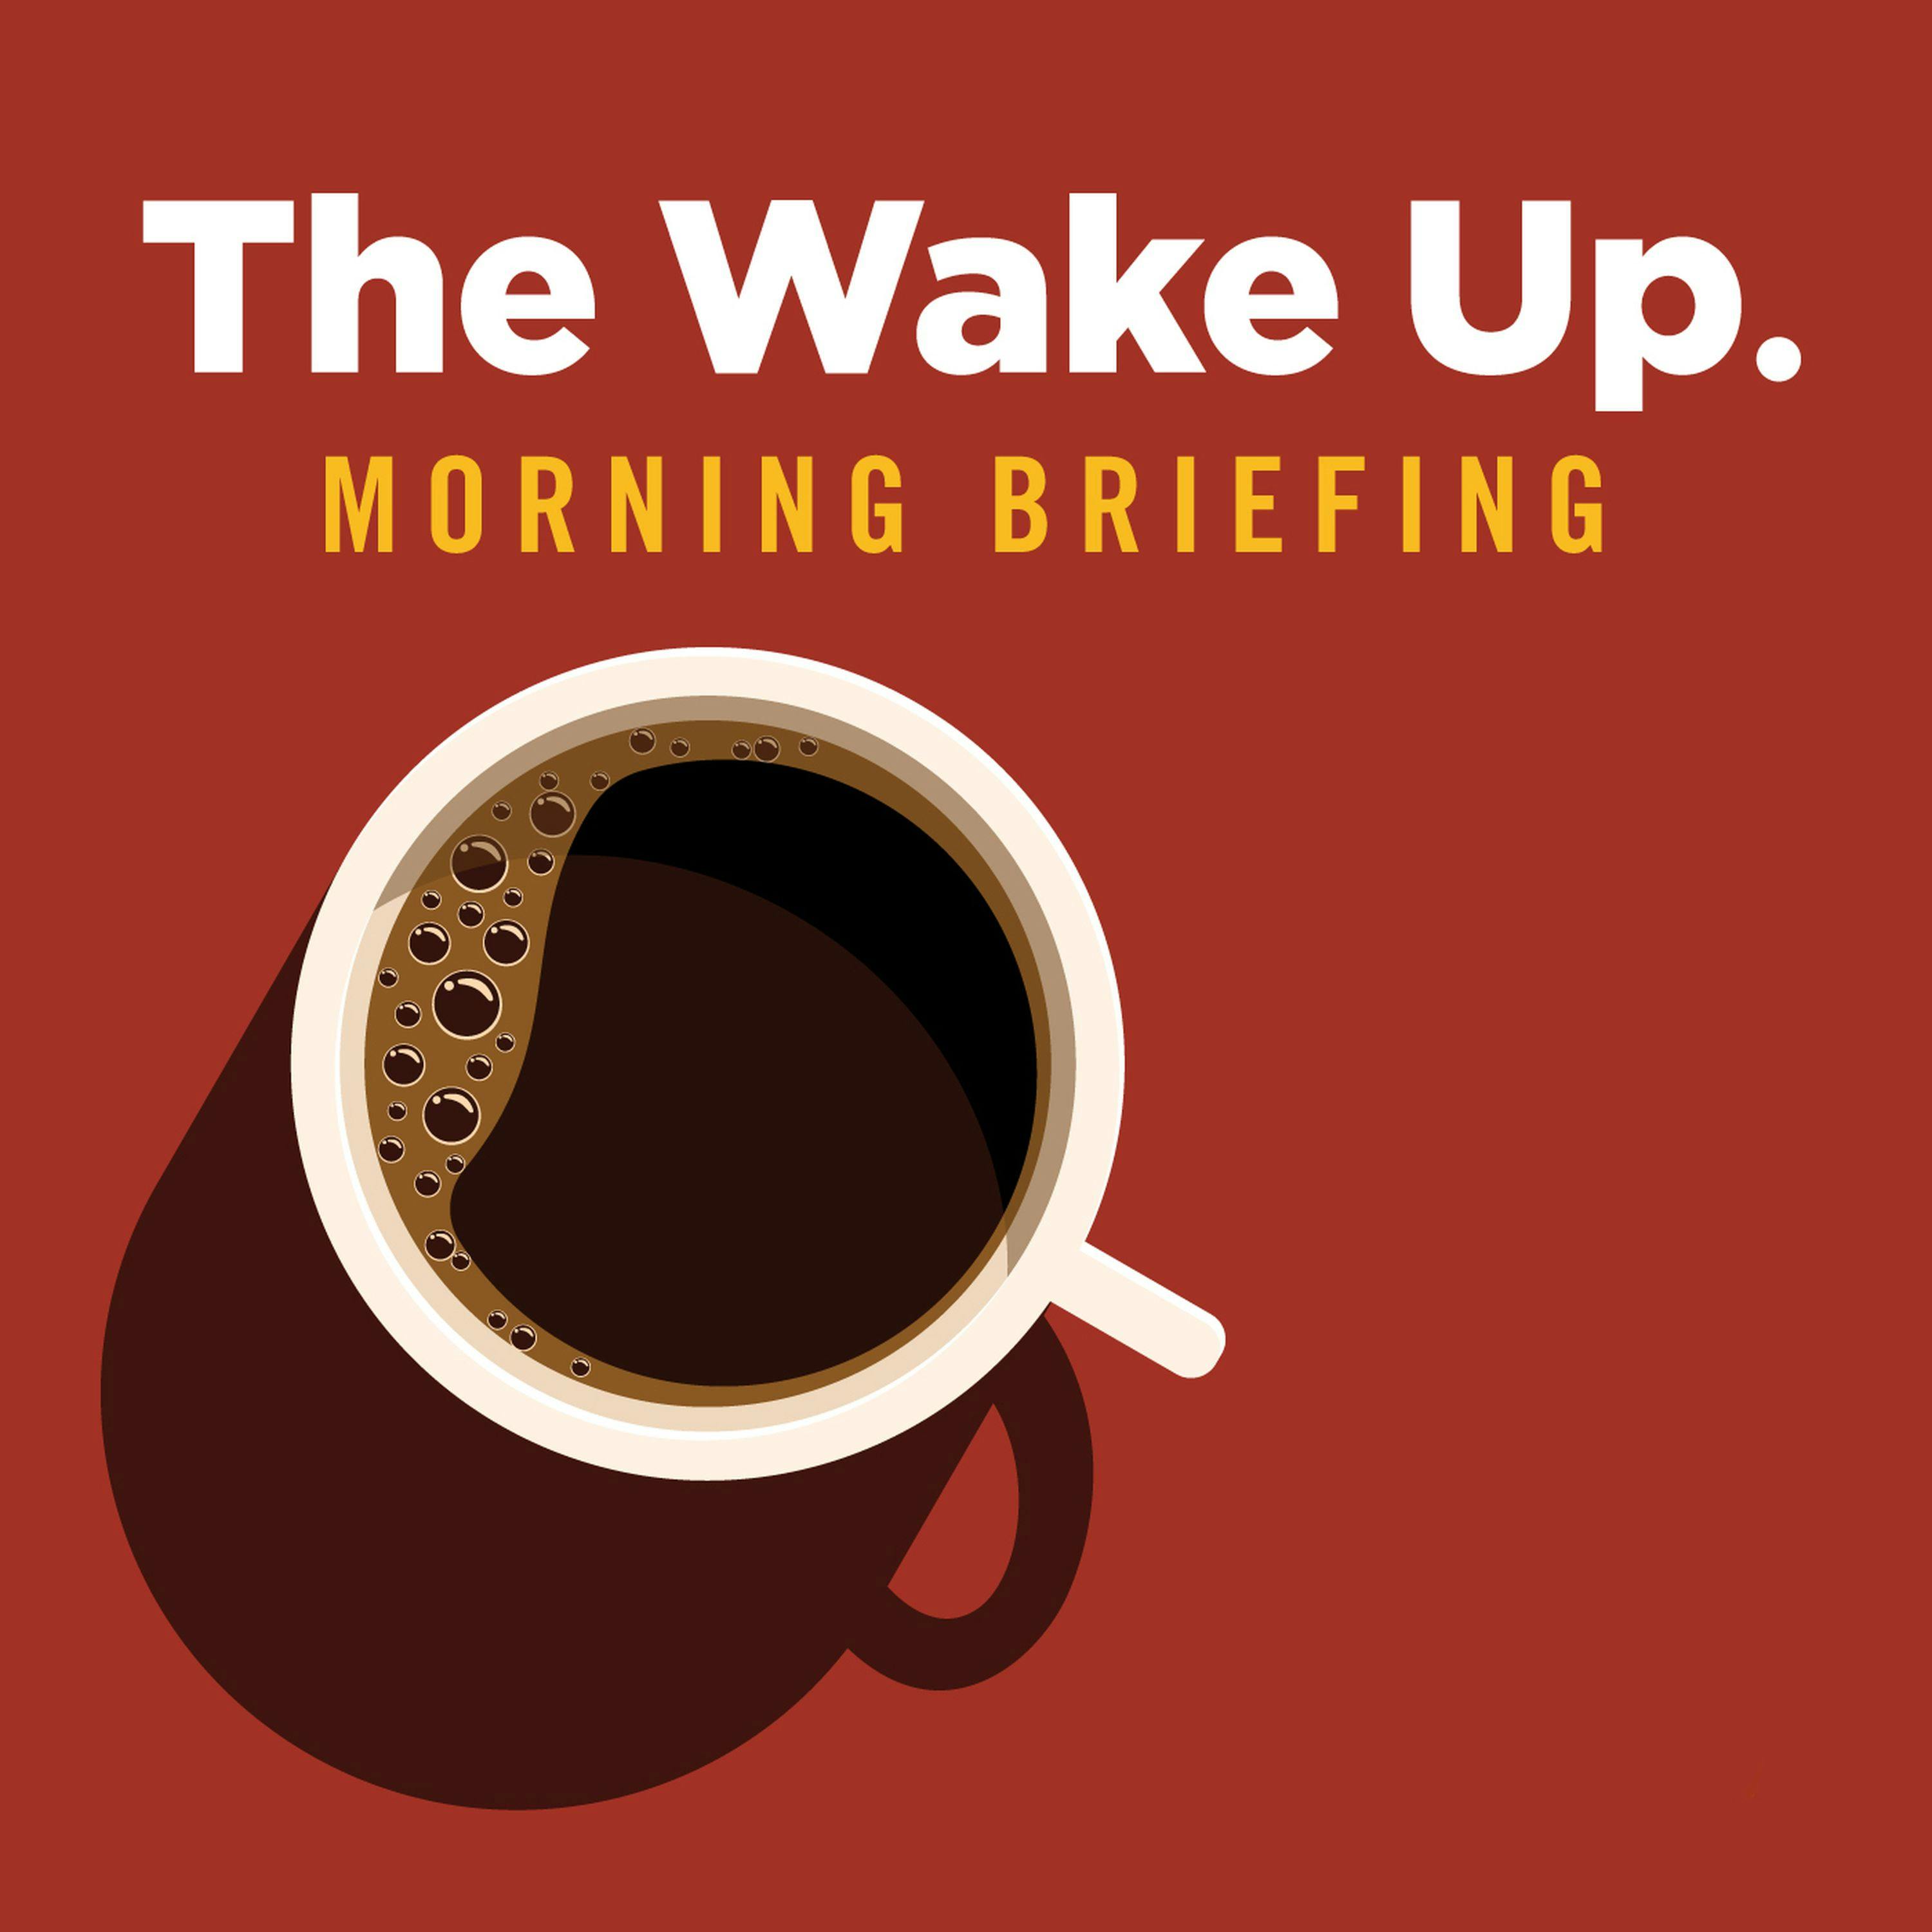 The Wake Up - Nov. 23, 2020 -- Sam Randazzo, Ohio public utilities chief, quits after the feds raid his house and FirstEnergy reveals a mysterious $4 million payment